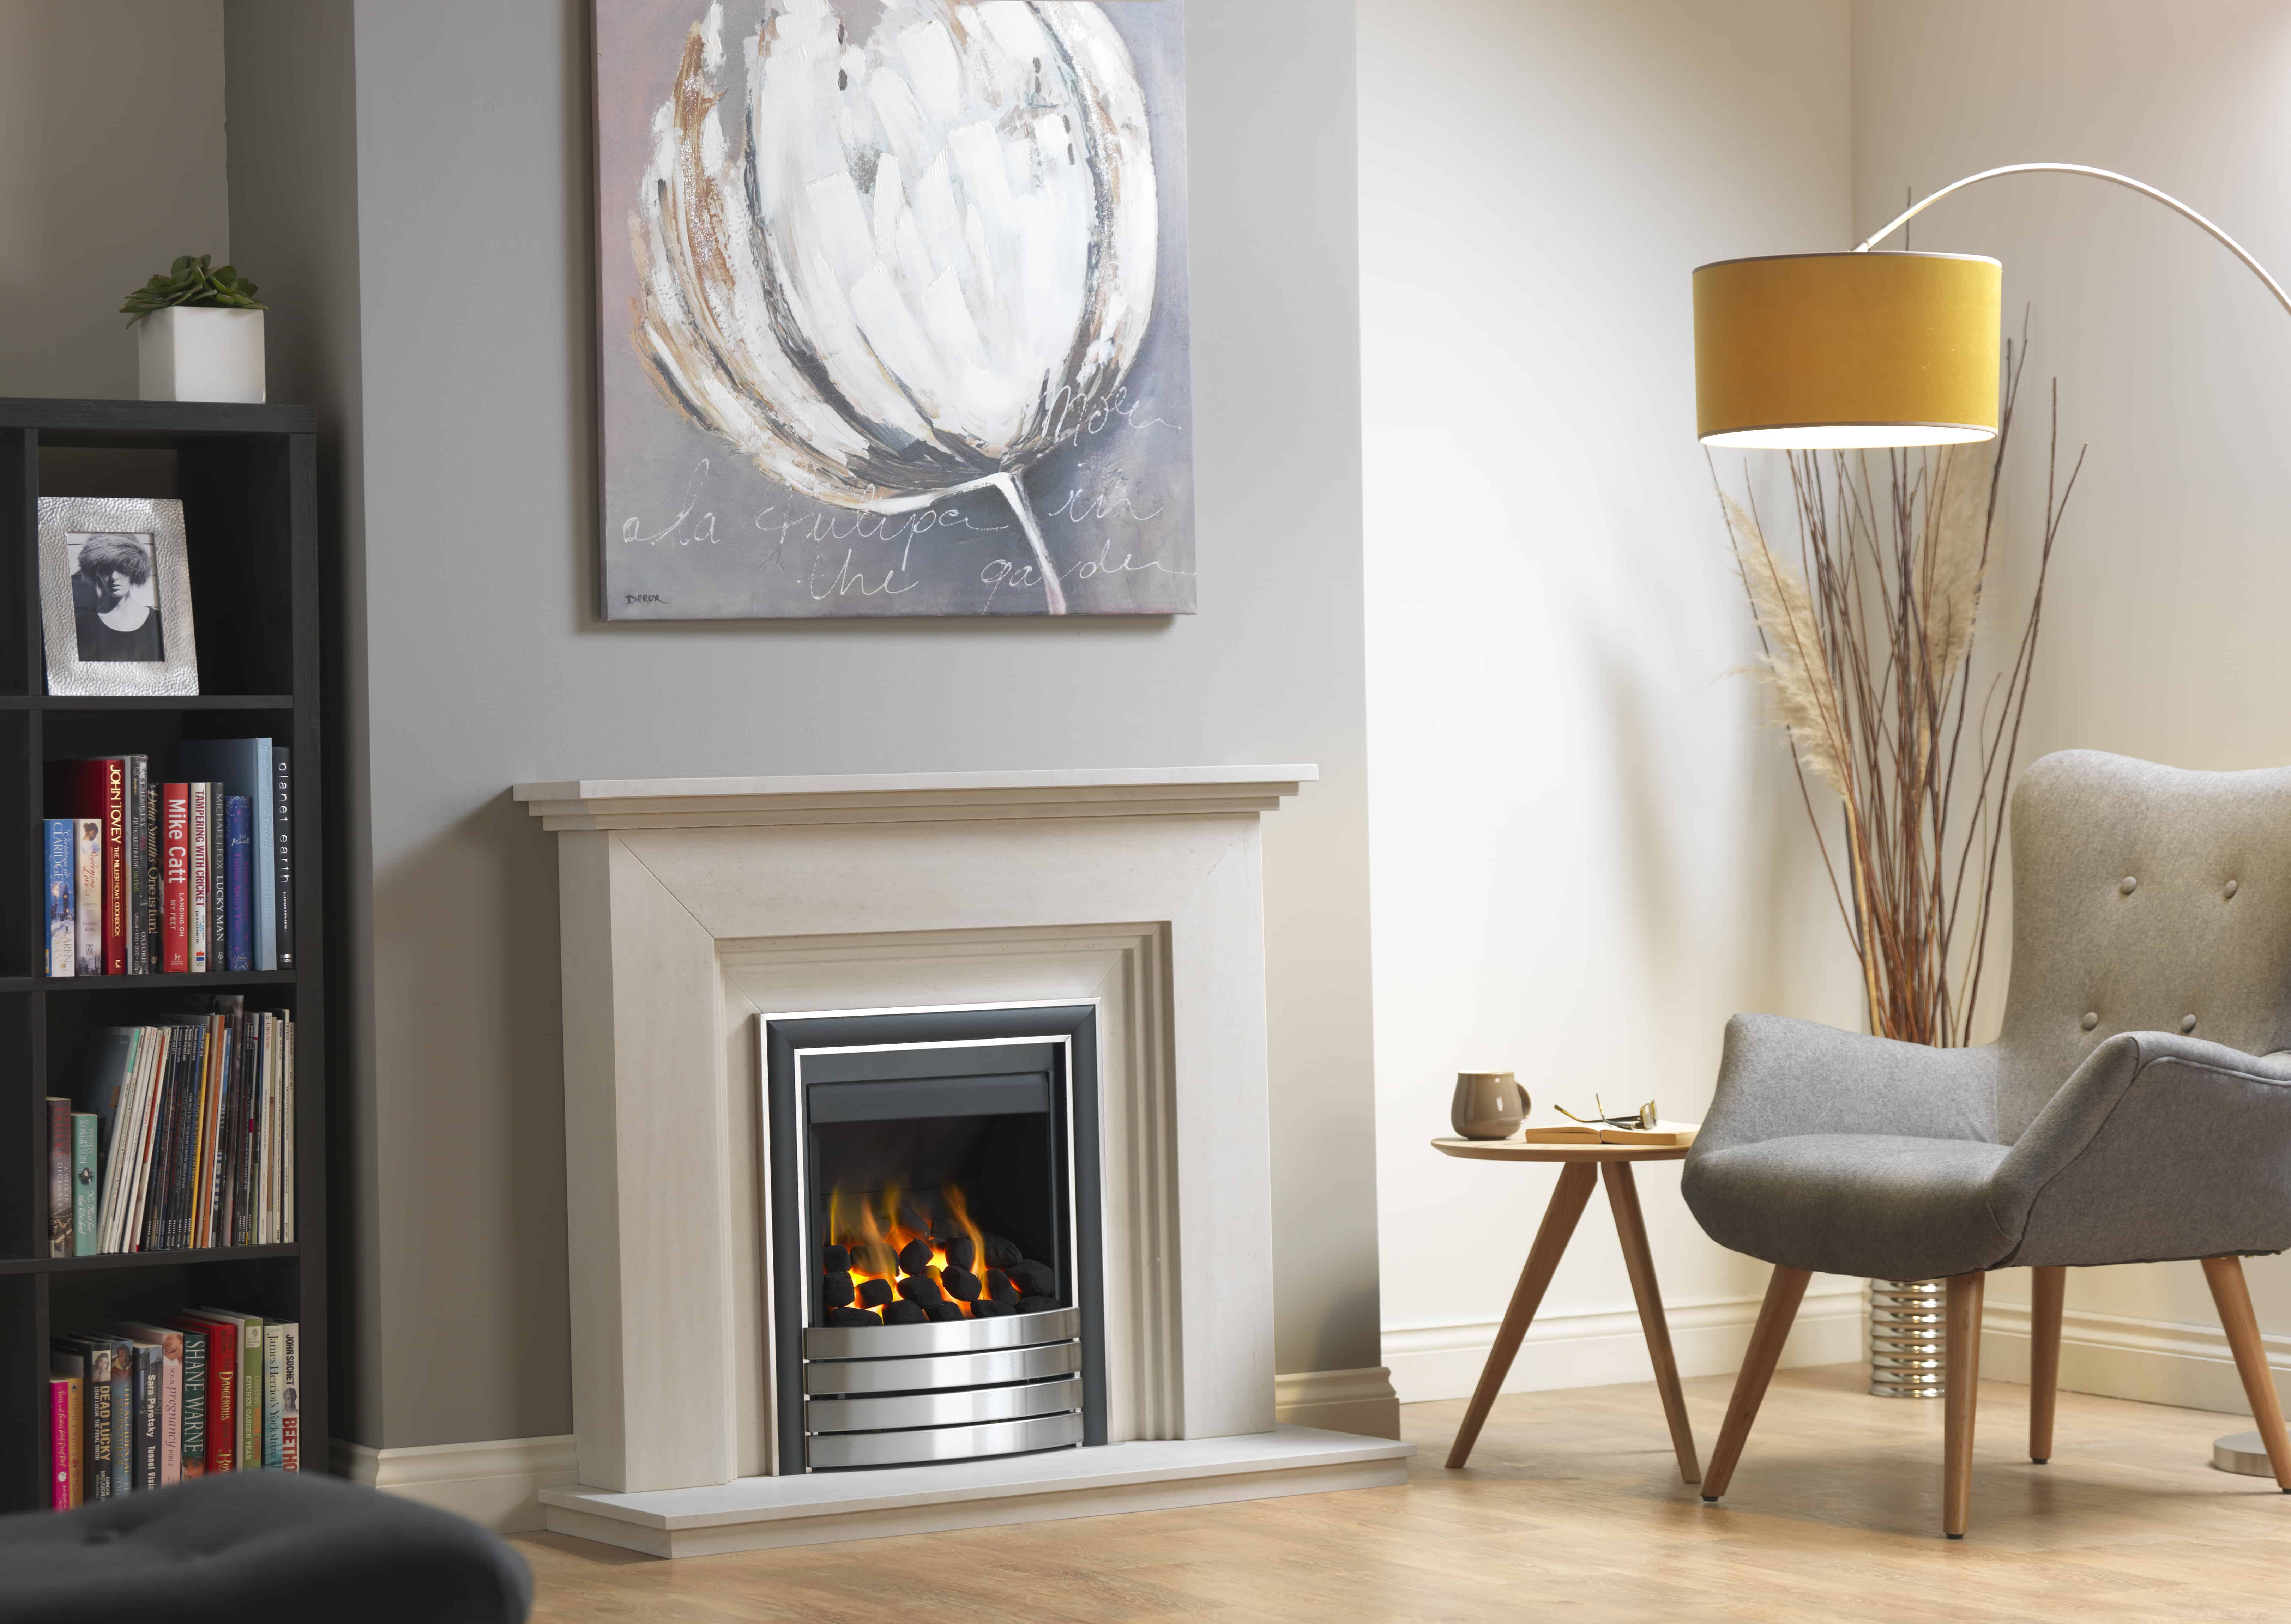 New Gas Fires Reduce Heating Cost.